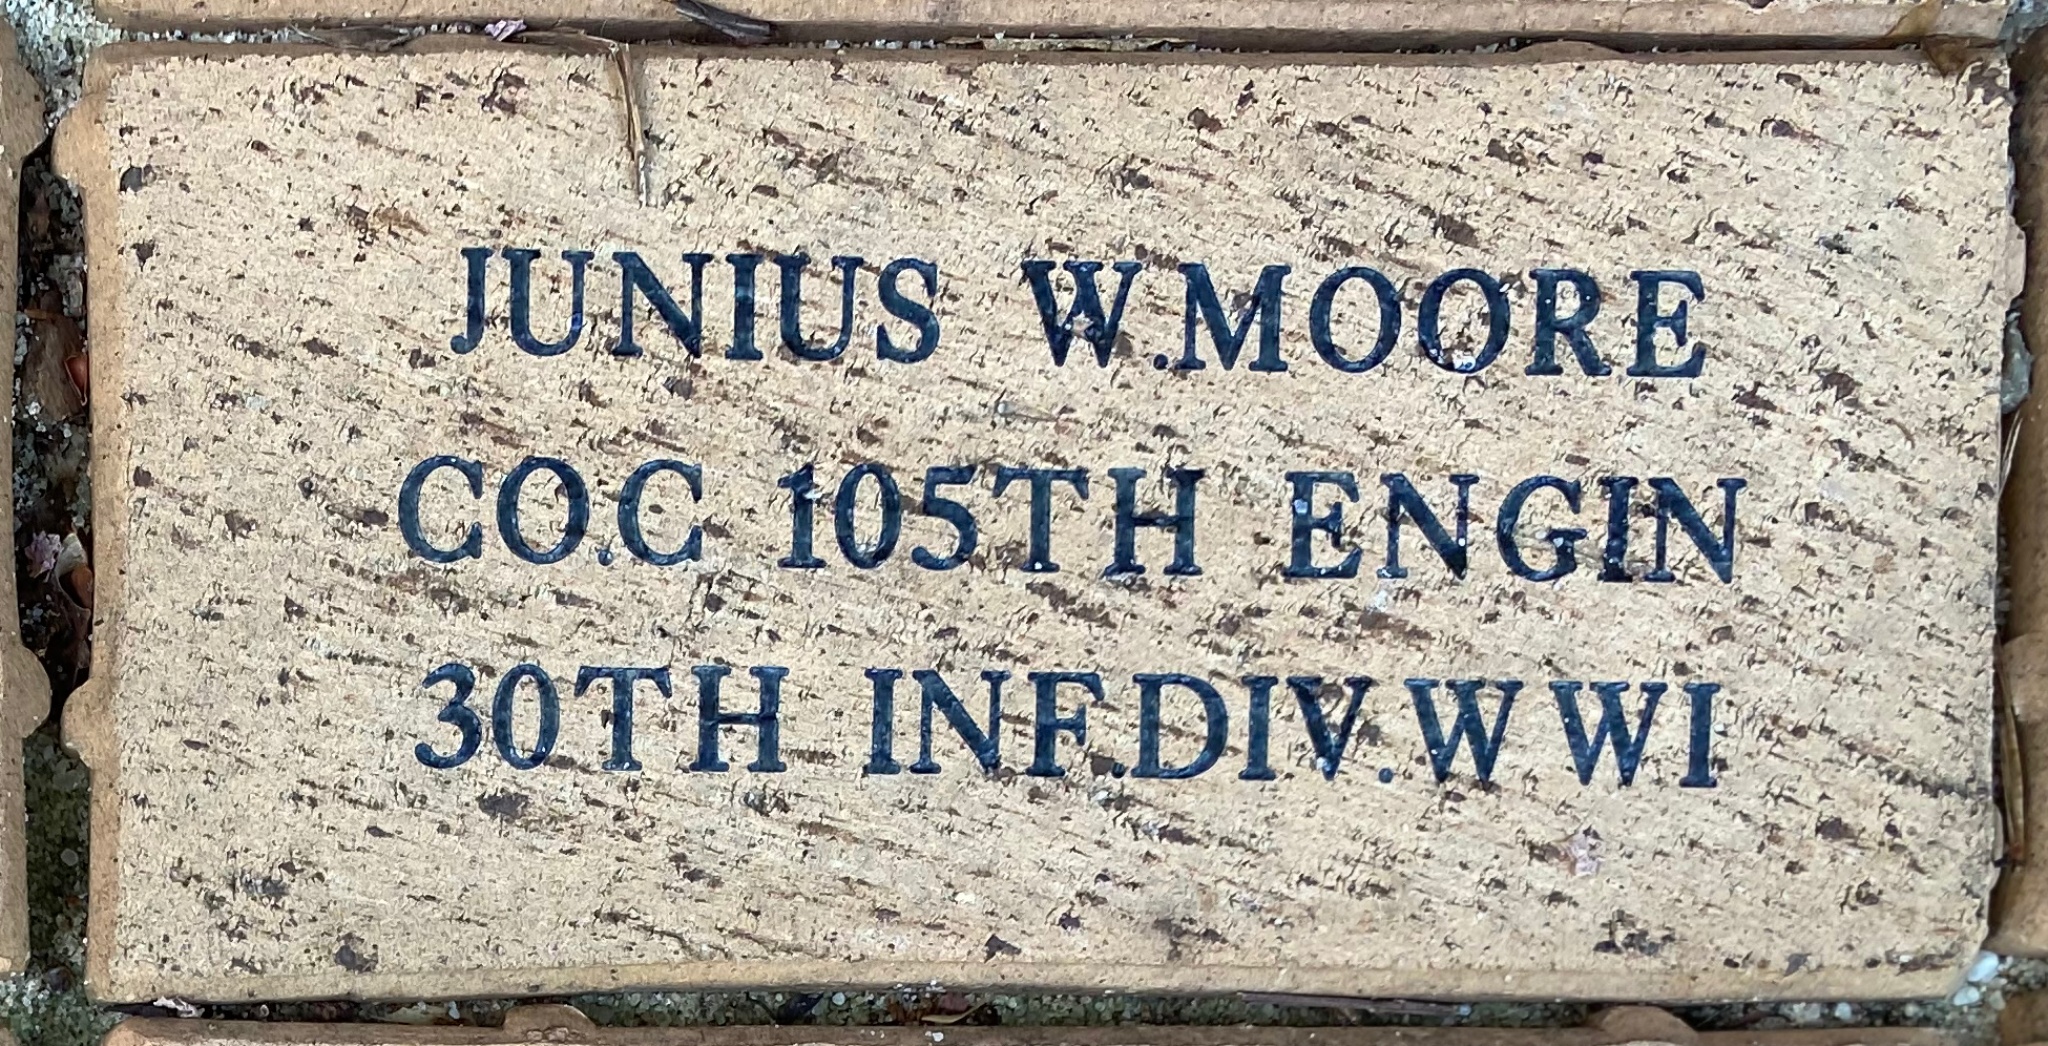 JUNIUS W. MOORE CO.C 105TH ENGIN 30TH INF.DIV WWI